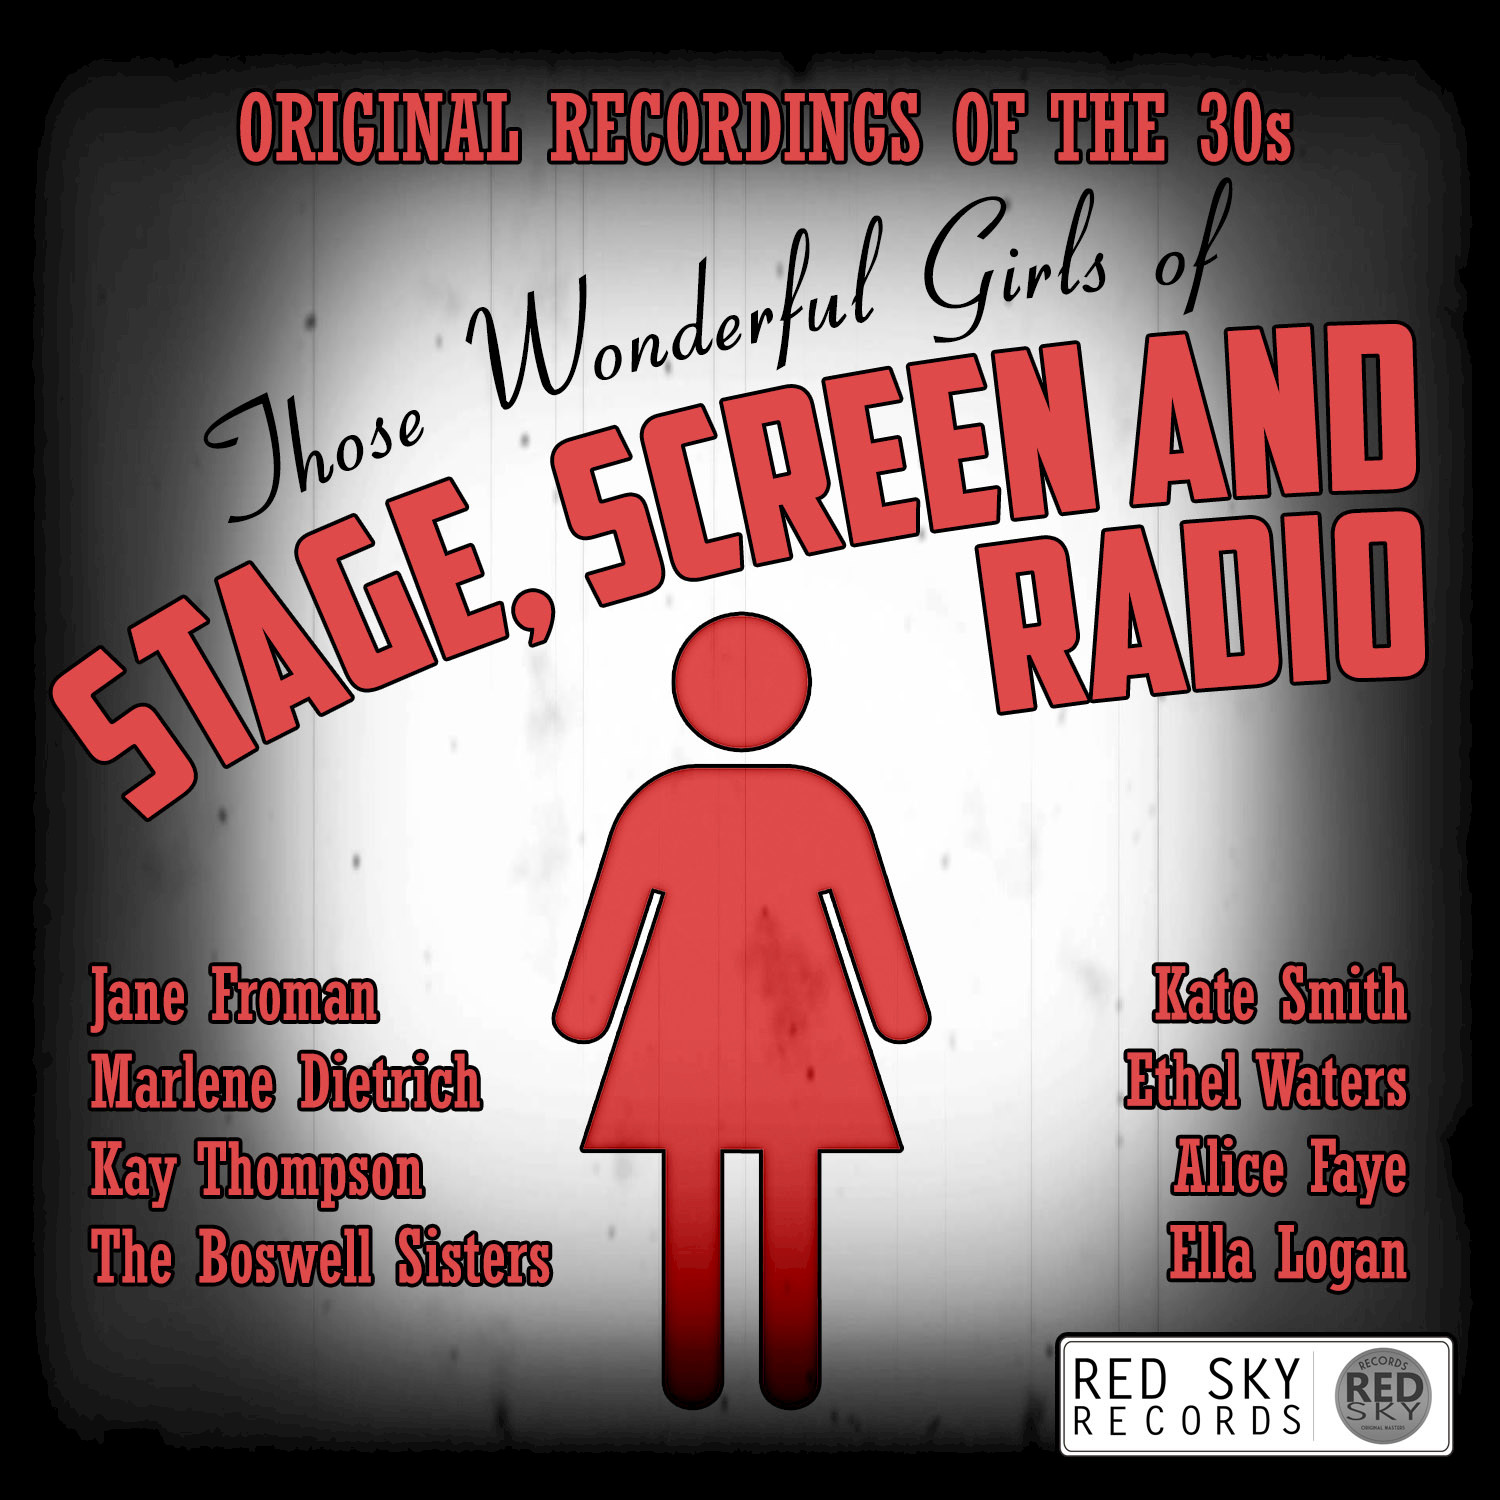 Those Wonderful Girls of Stage, Screen and Radio - Original Recordings of the 30s